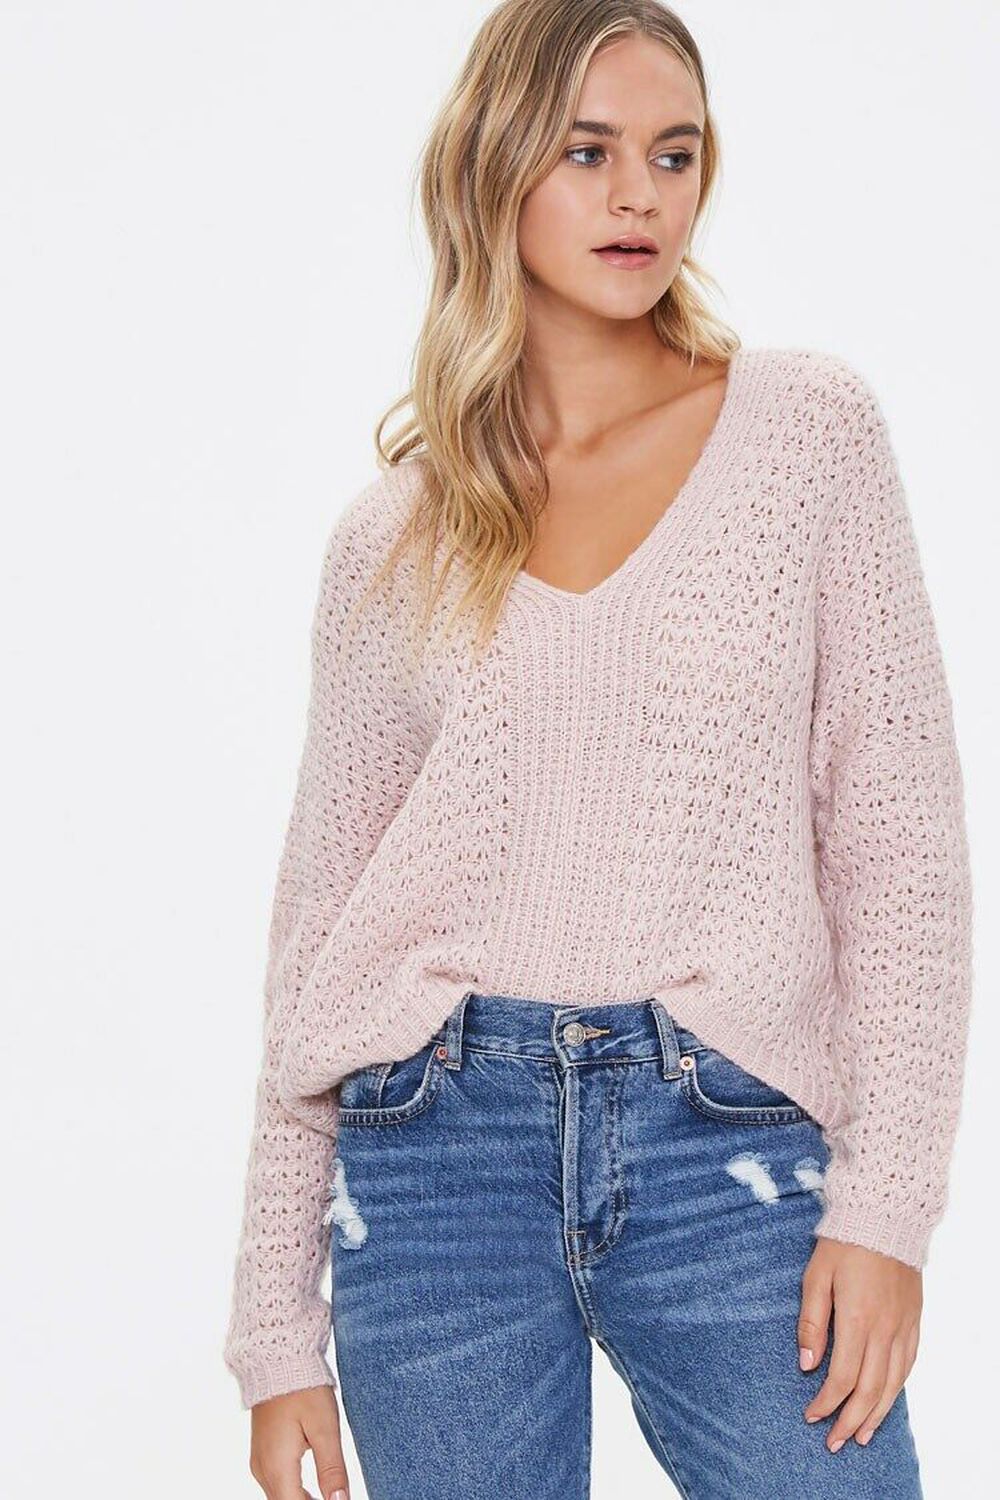 Open-Knit Dropped-Sleeve Sweater, image 1